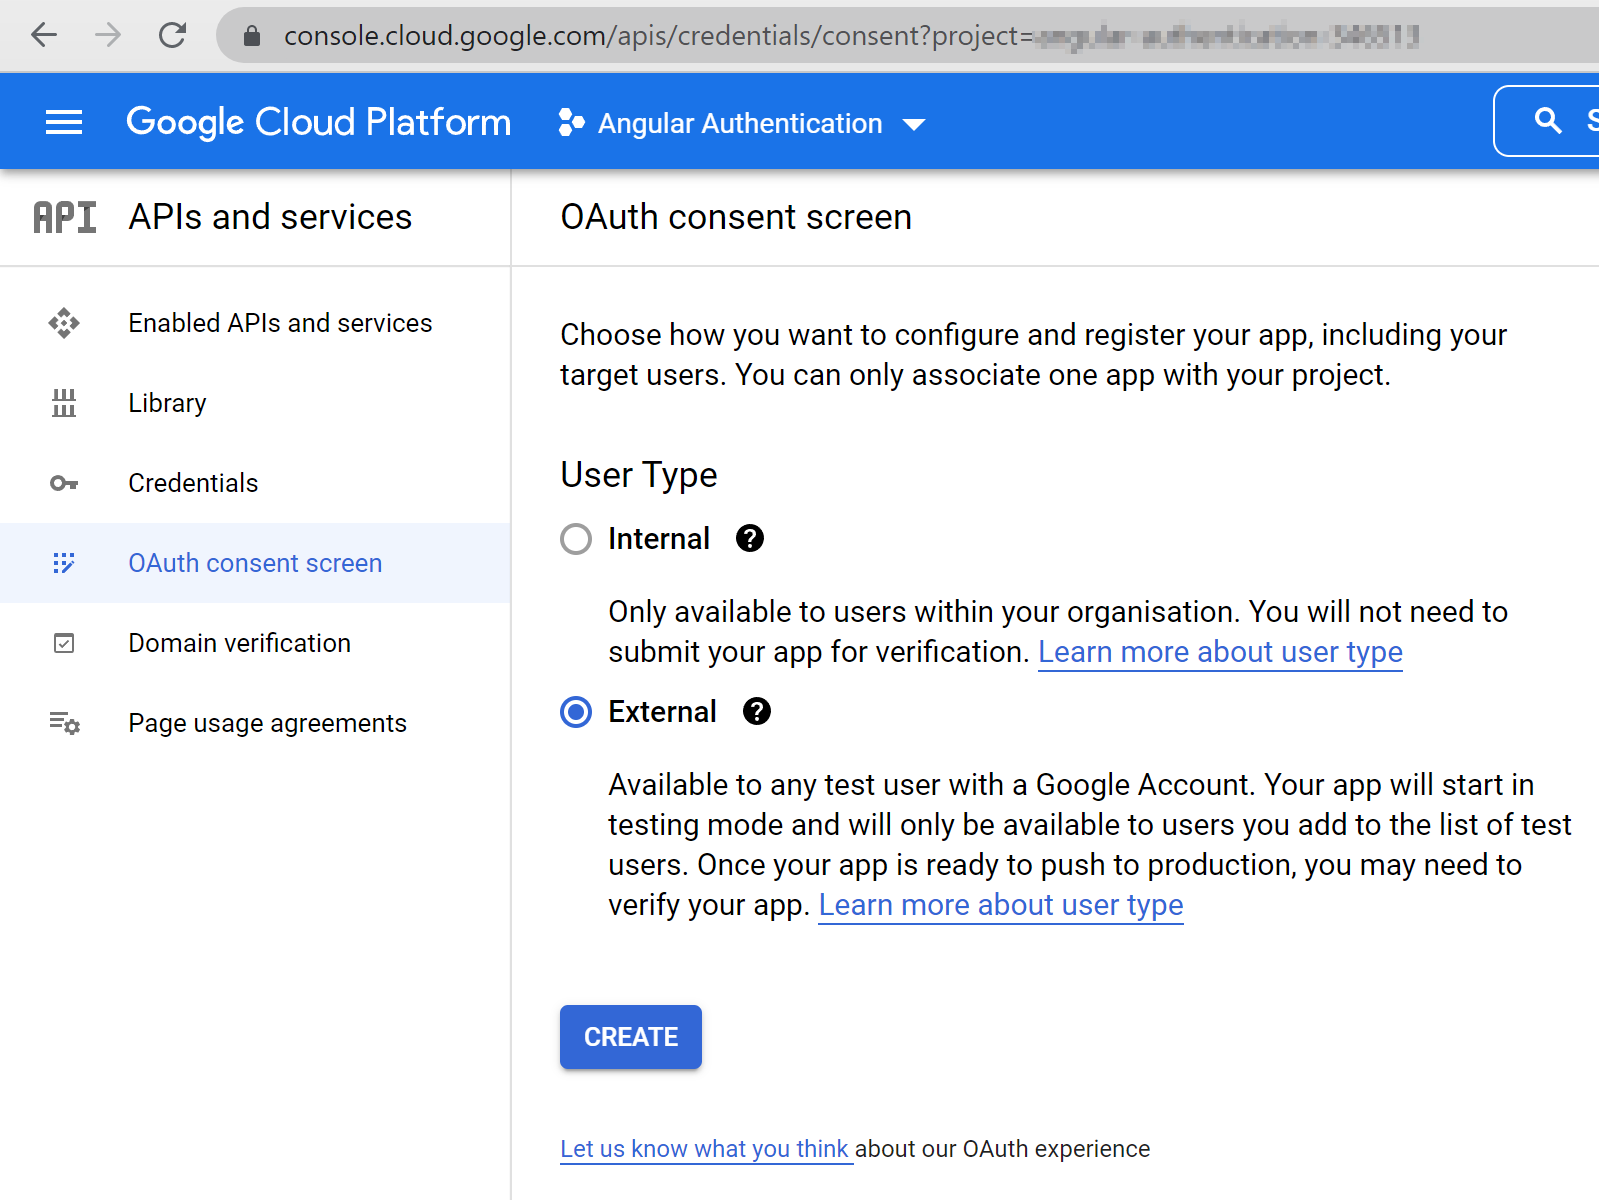 Configuring OAuth consent screen in GCP console